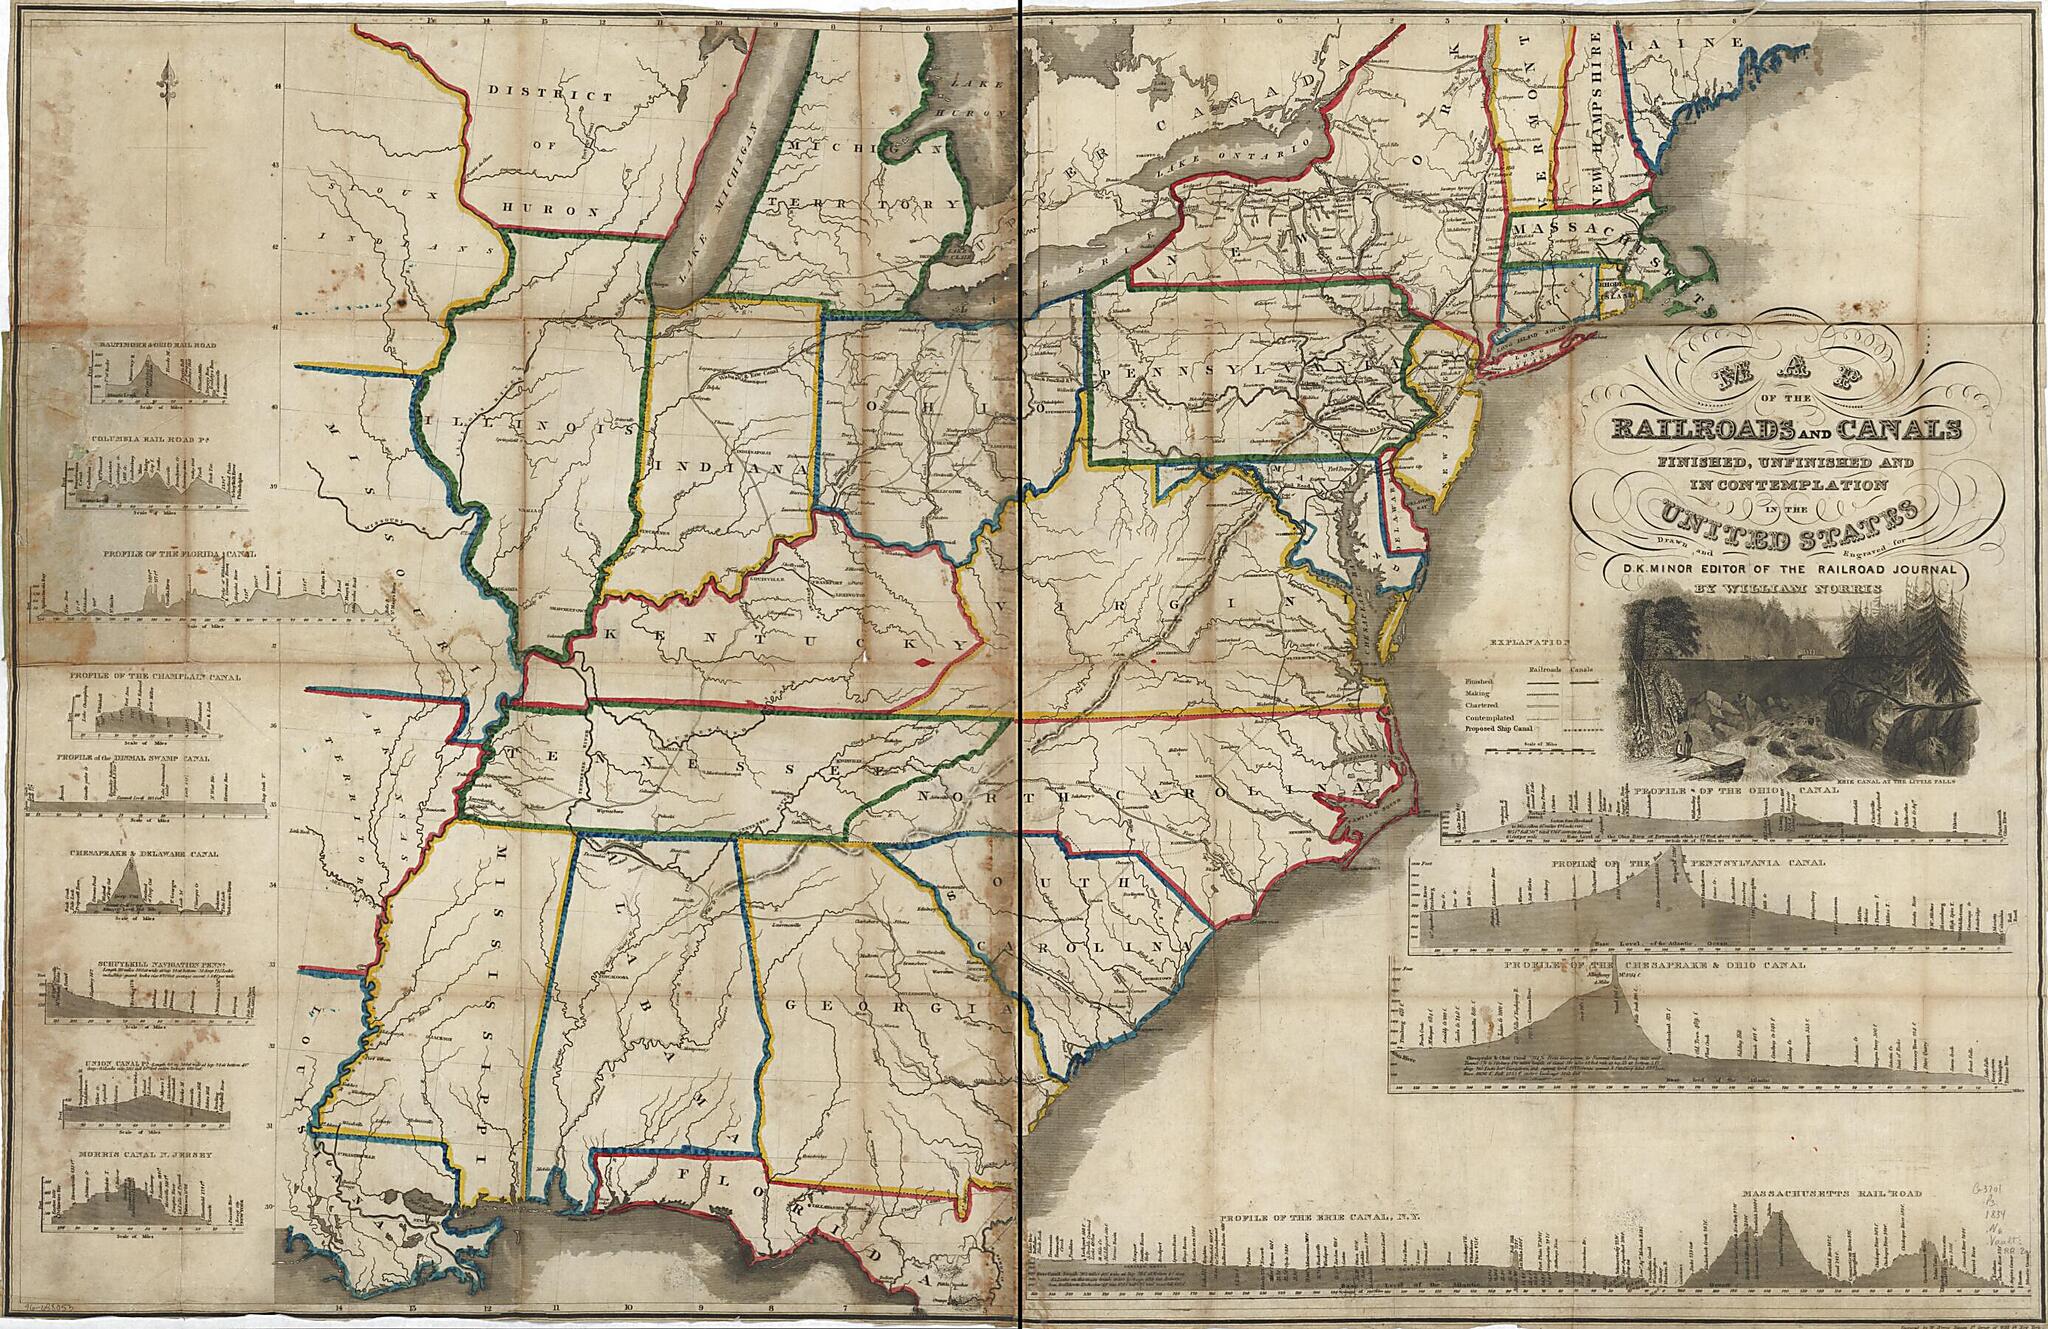 This old map of Map of the Railroads and Canals, Finished, Unfinished, and In Contemplation, In the United States (Rail Road Map) from 1834 was created by Daniel K. Minor, William Norris in 1834